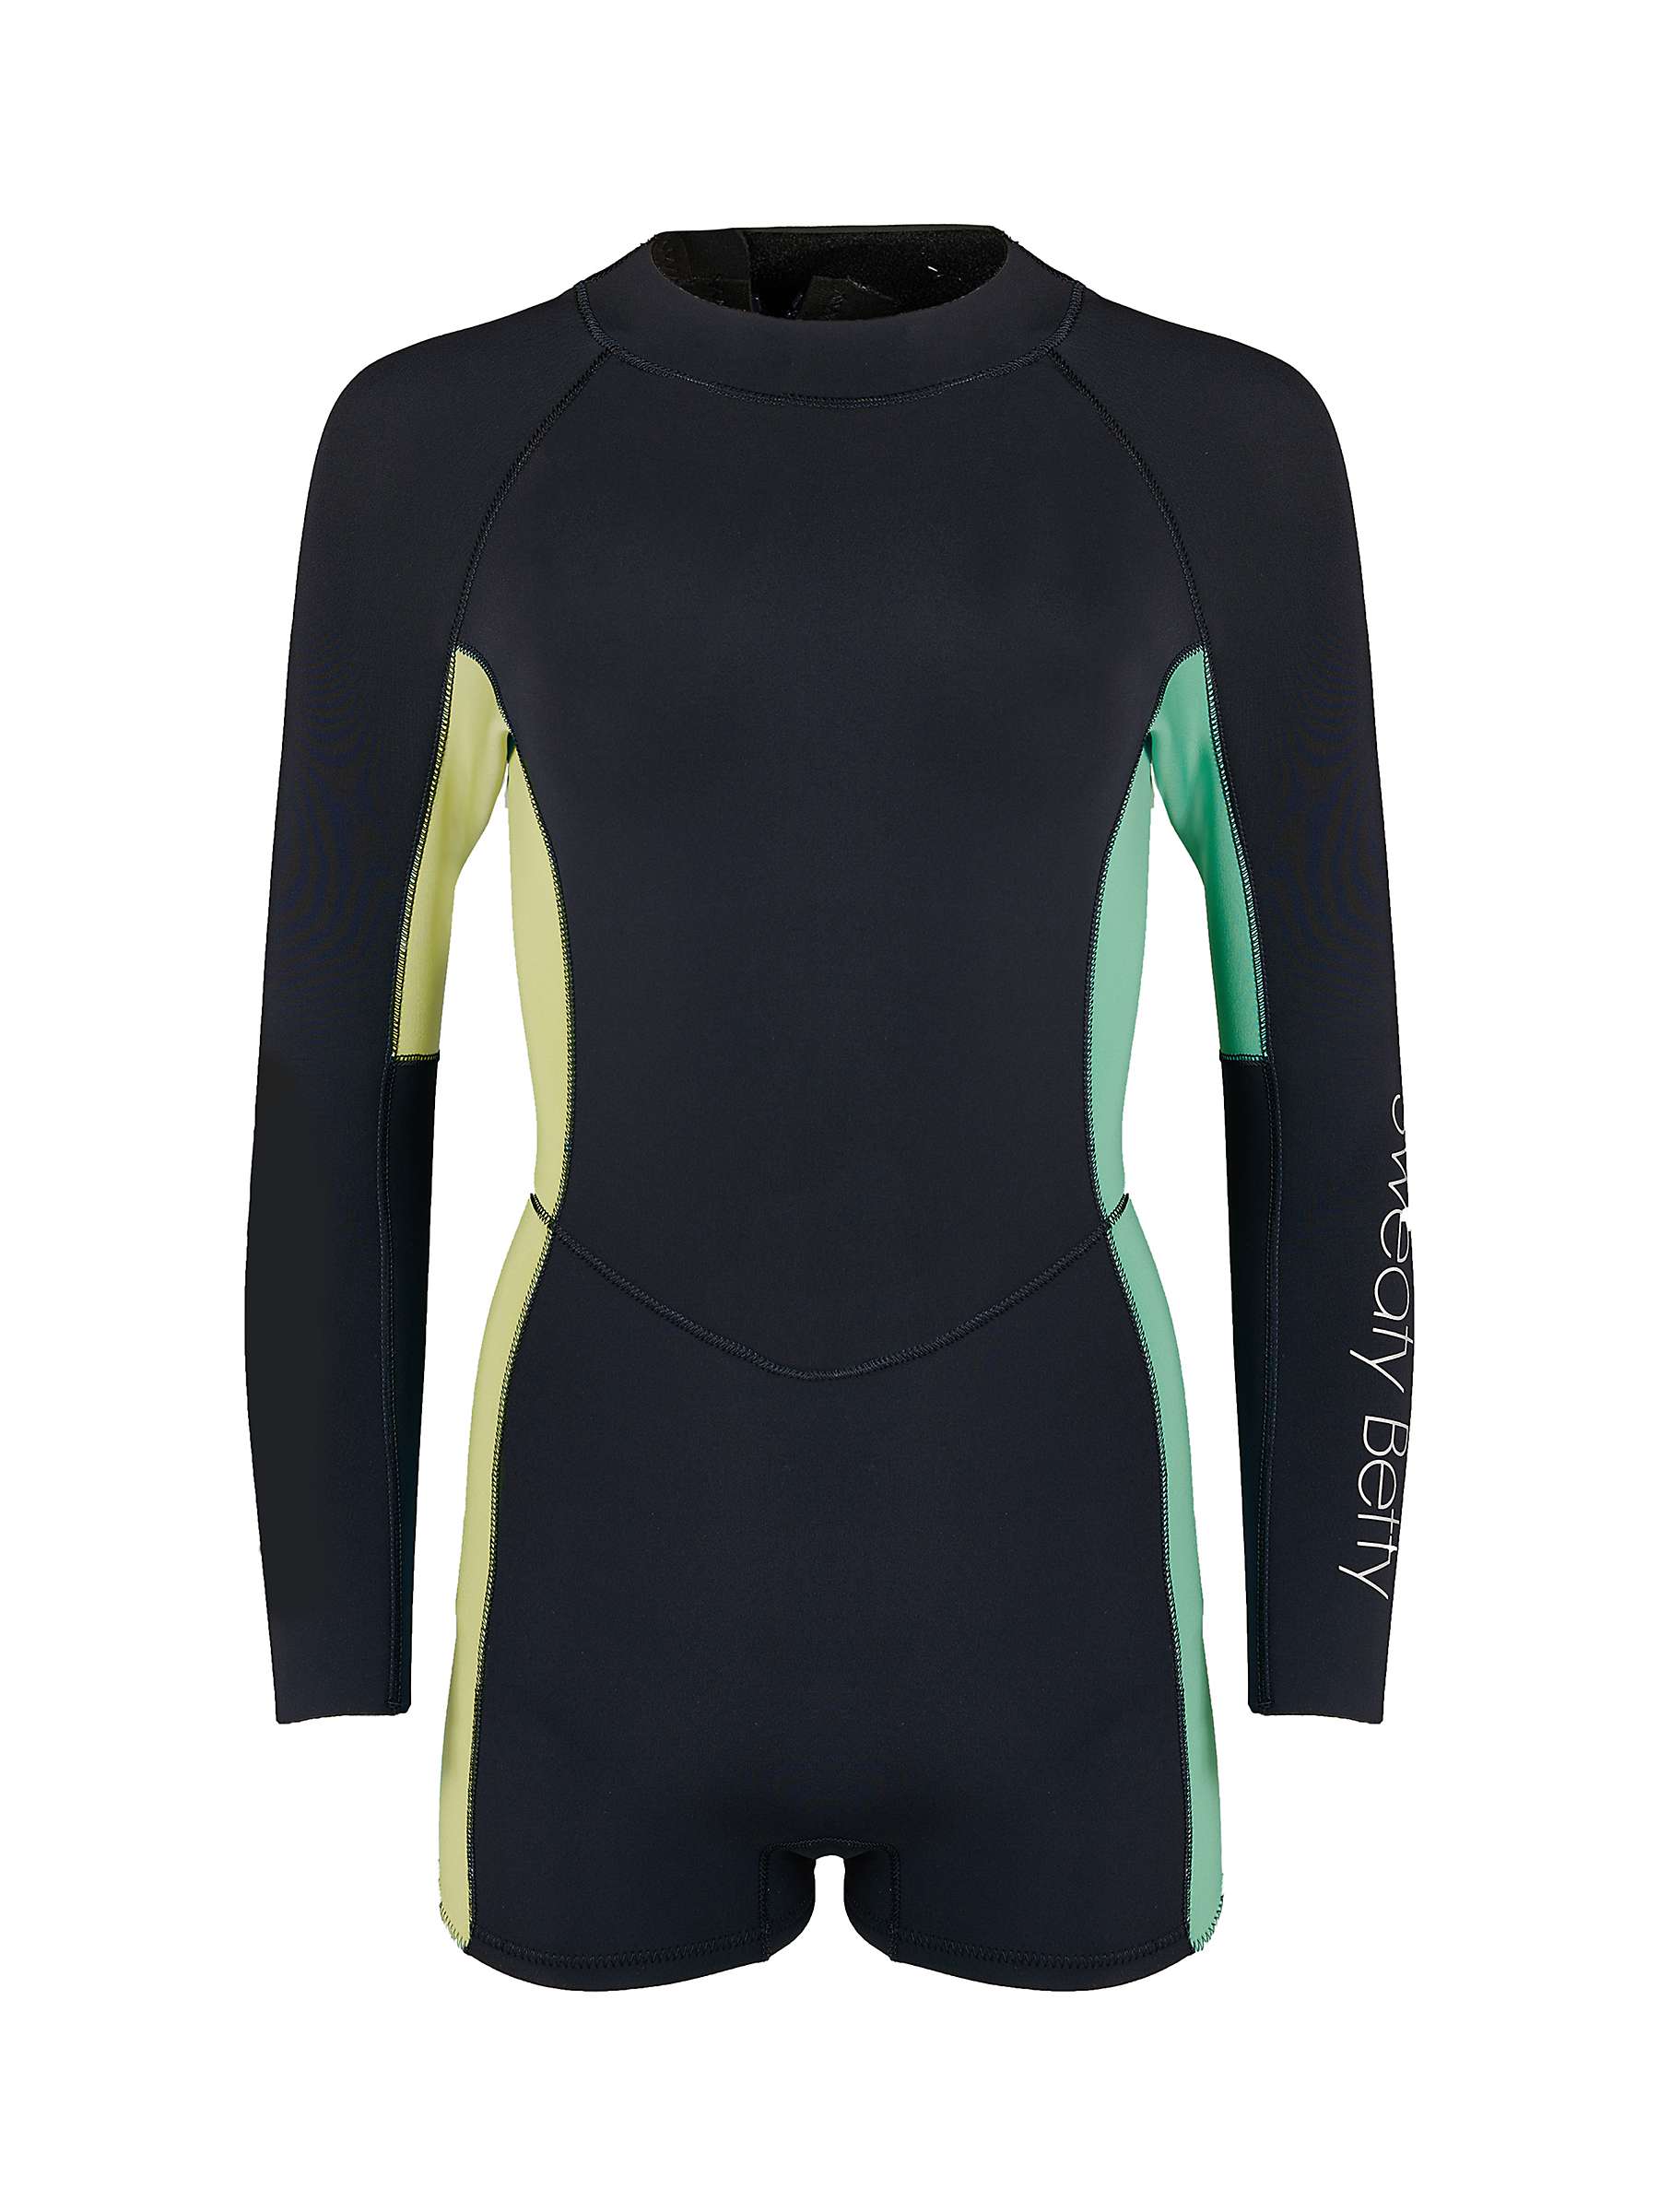 Buy Sweaty Betty Long Sleeve Surf Wetsuit, French Navy/Multi Online at johnlewis.com